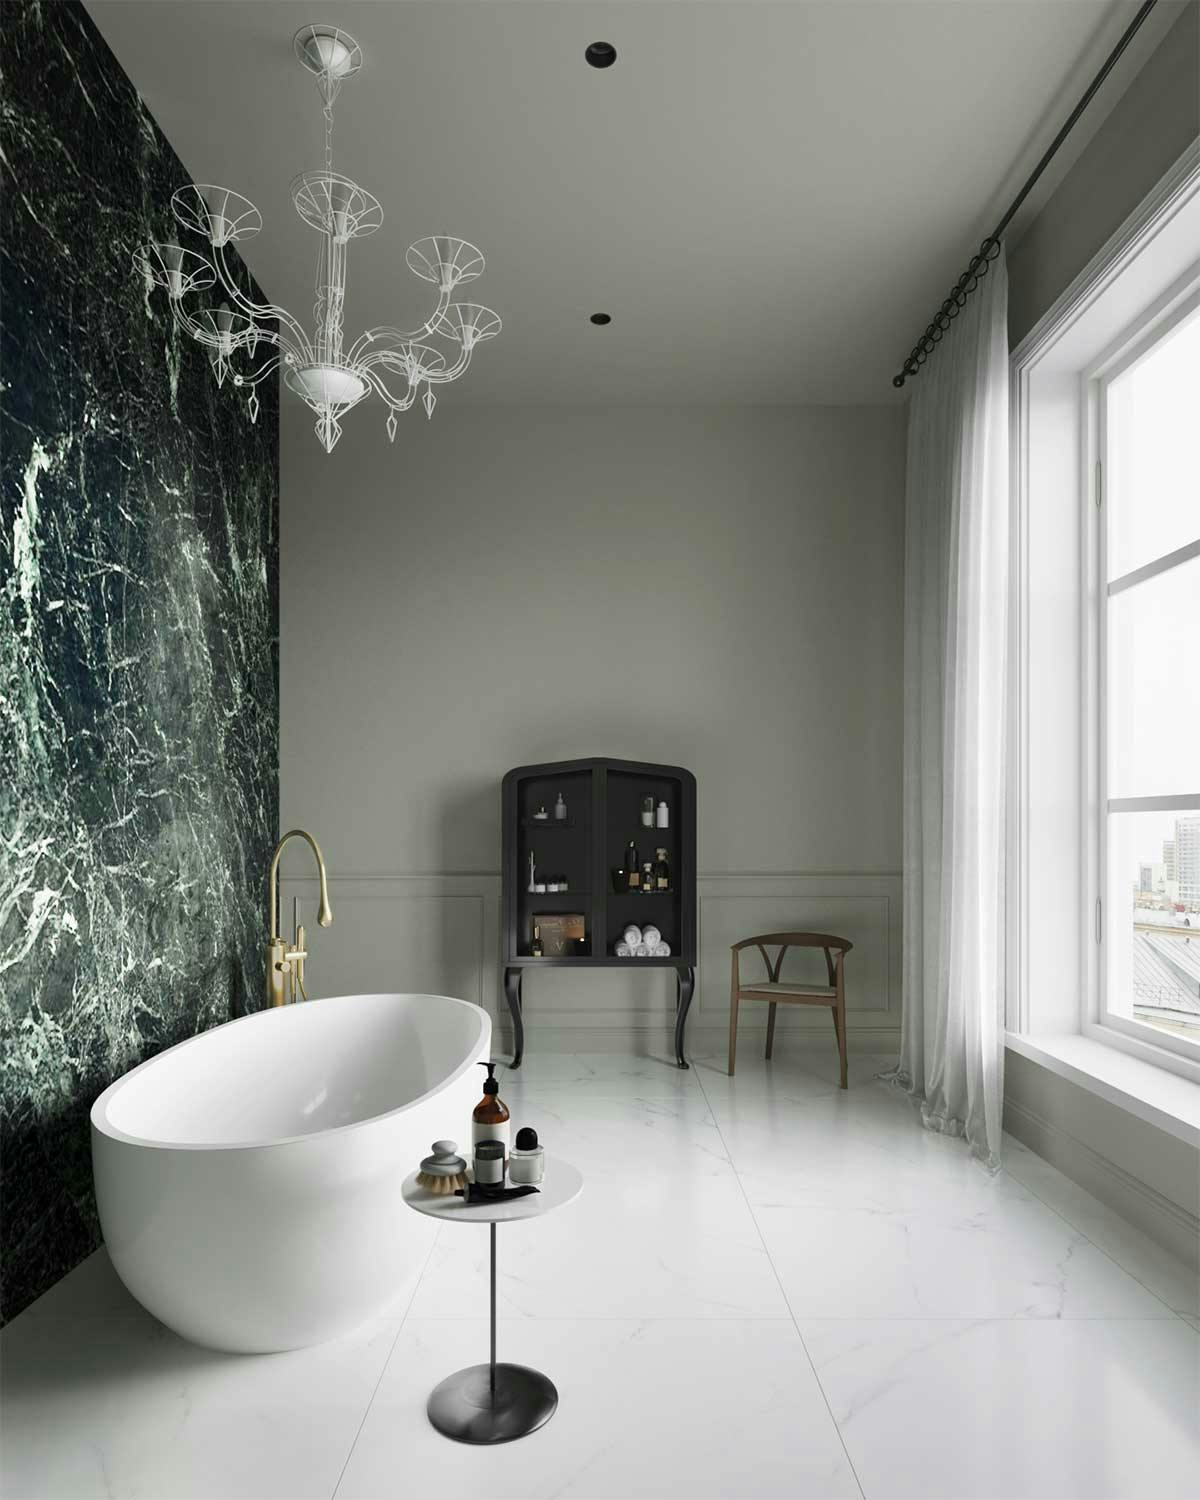 3D Visualization of the interior with the interior design concept of a master bathroom with a window in the penthause in a old building in Berlin, Germany.